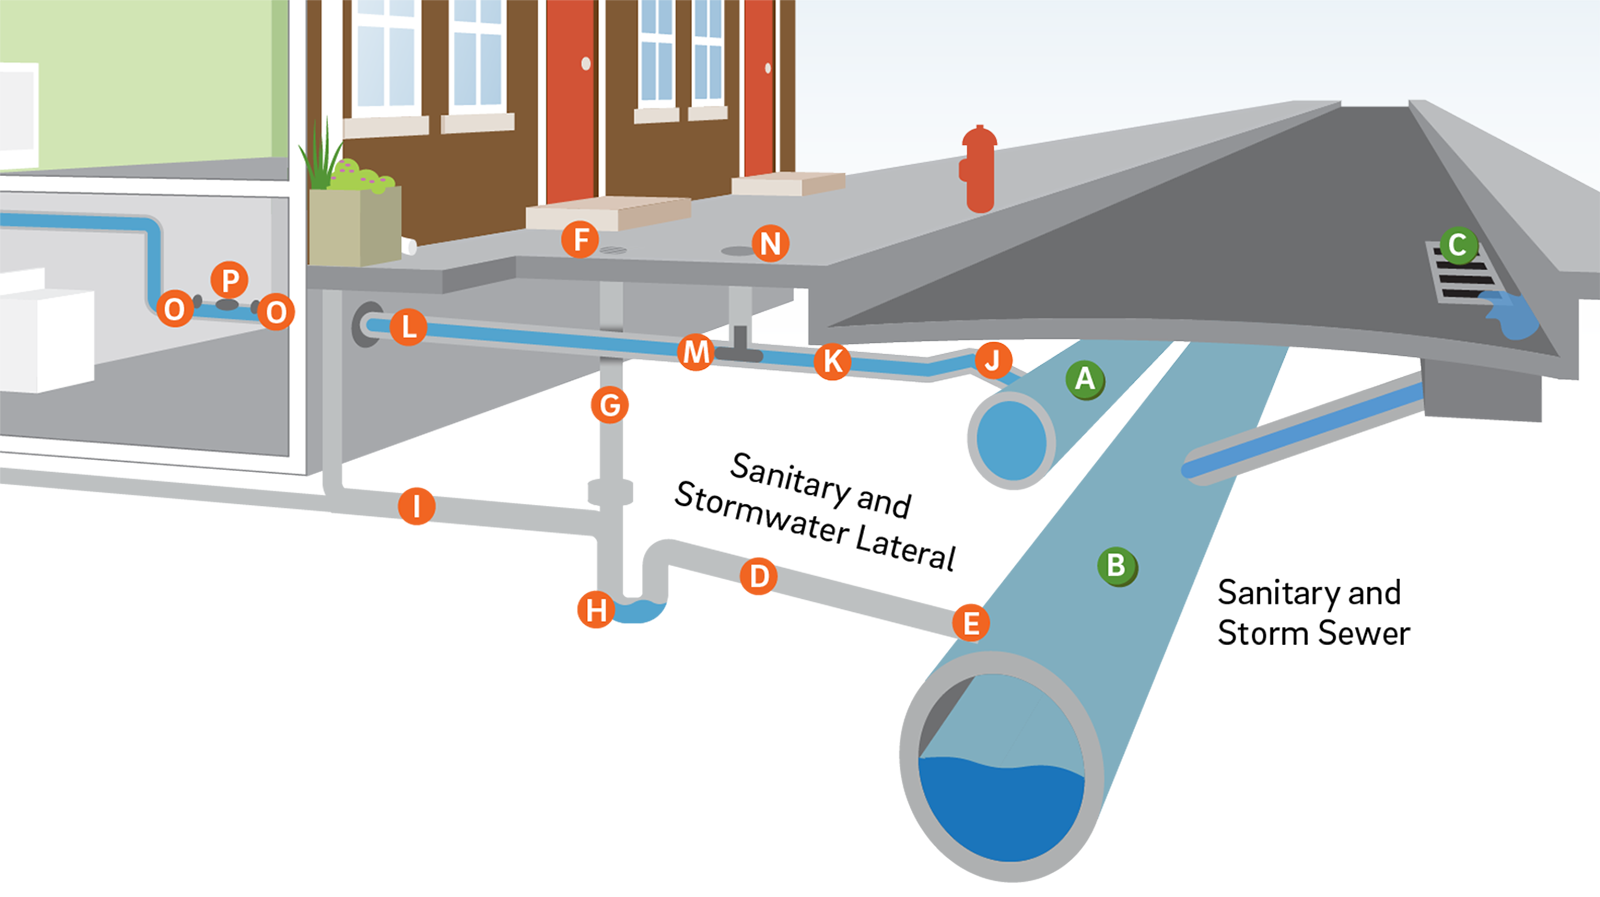 diagram illustrating the drinking water and sewer connections under a typical home (in a combined sewer area) - the water and sewer mains running under the street, and the storm drain at the curb are PWD's responsibility, while all the pipes, vents, and valves in the home and connecting it to the mains are the responsibility of the property owner.